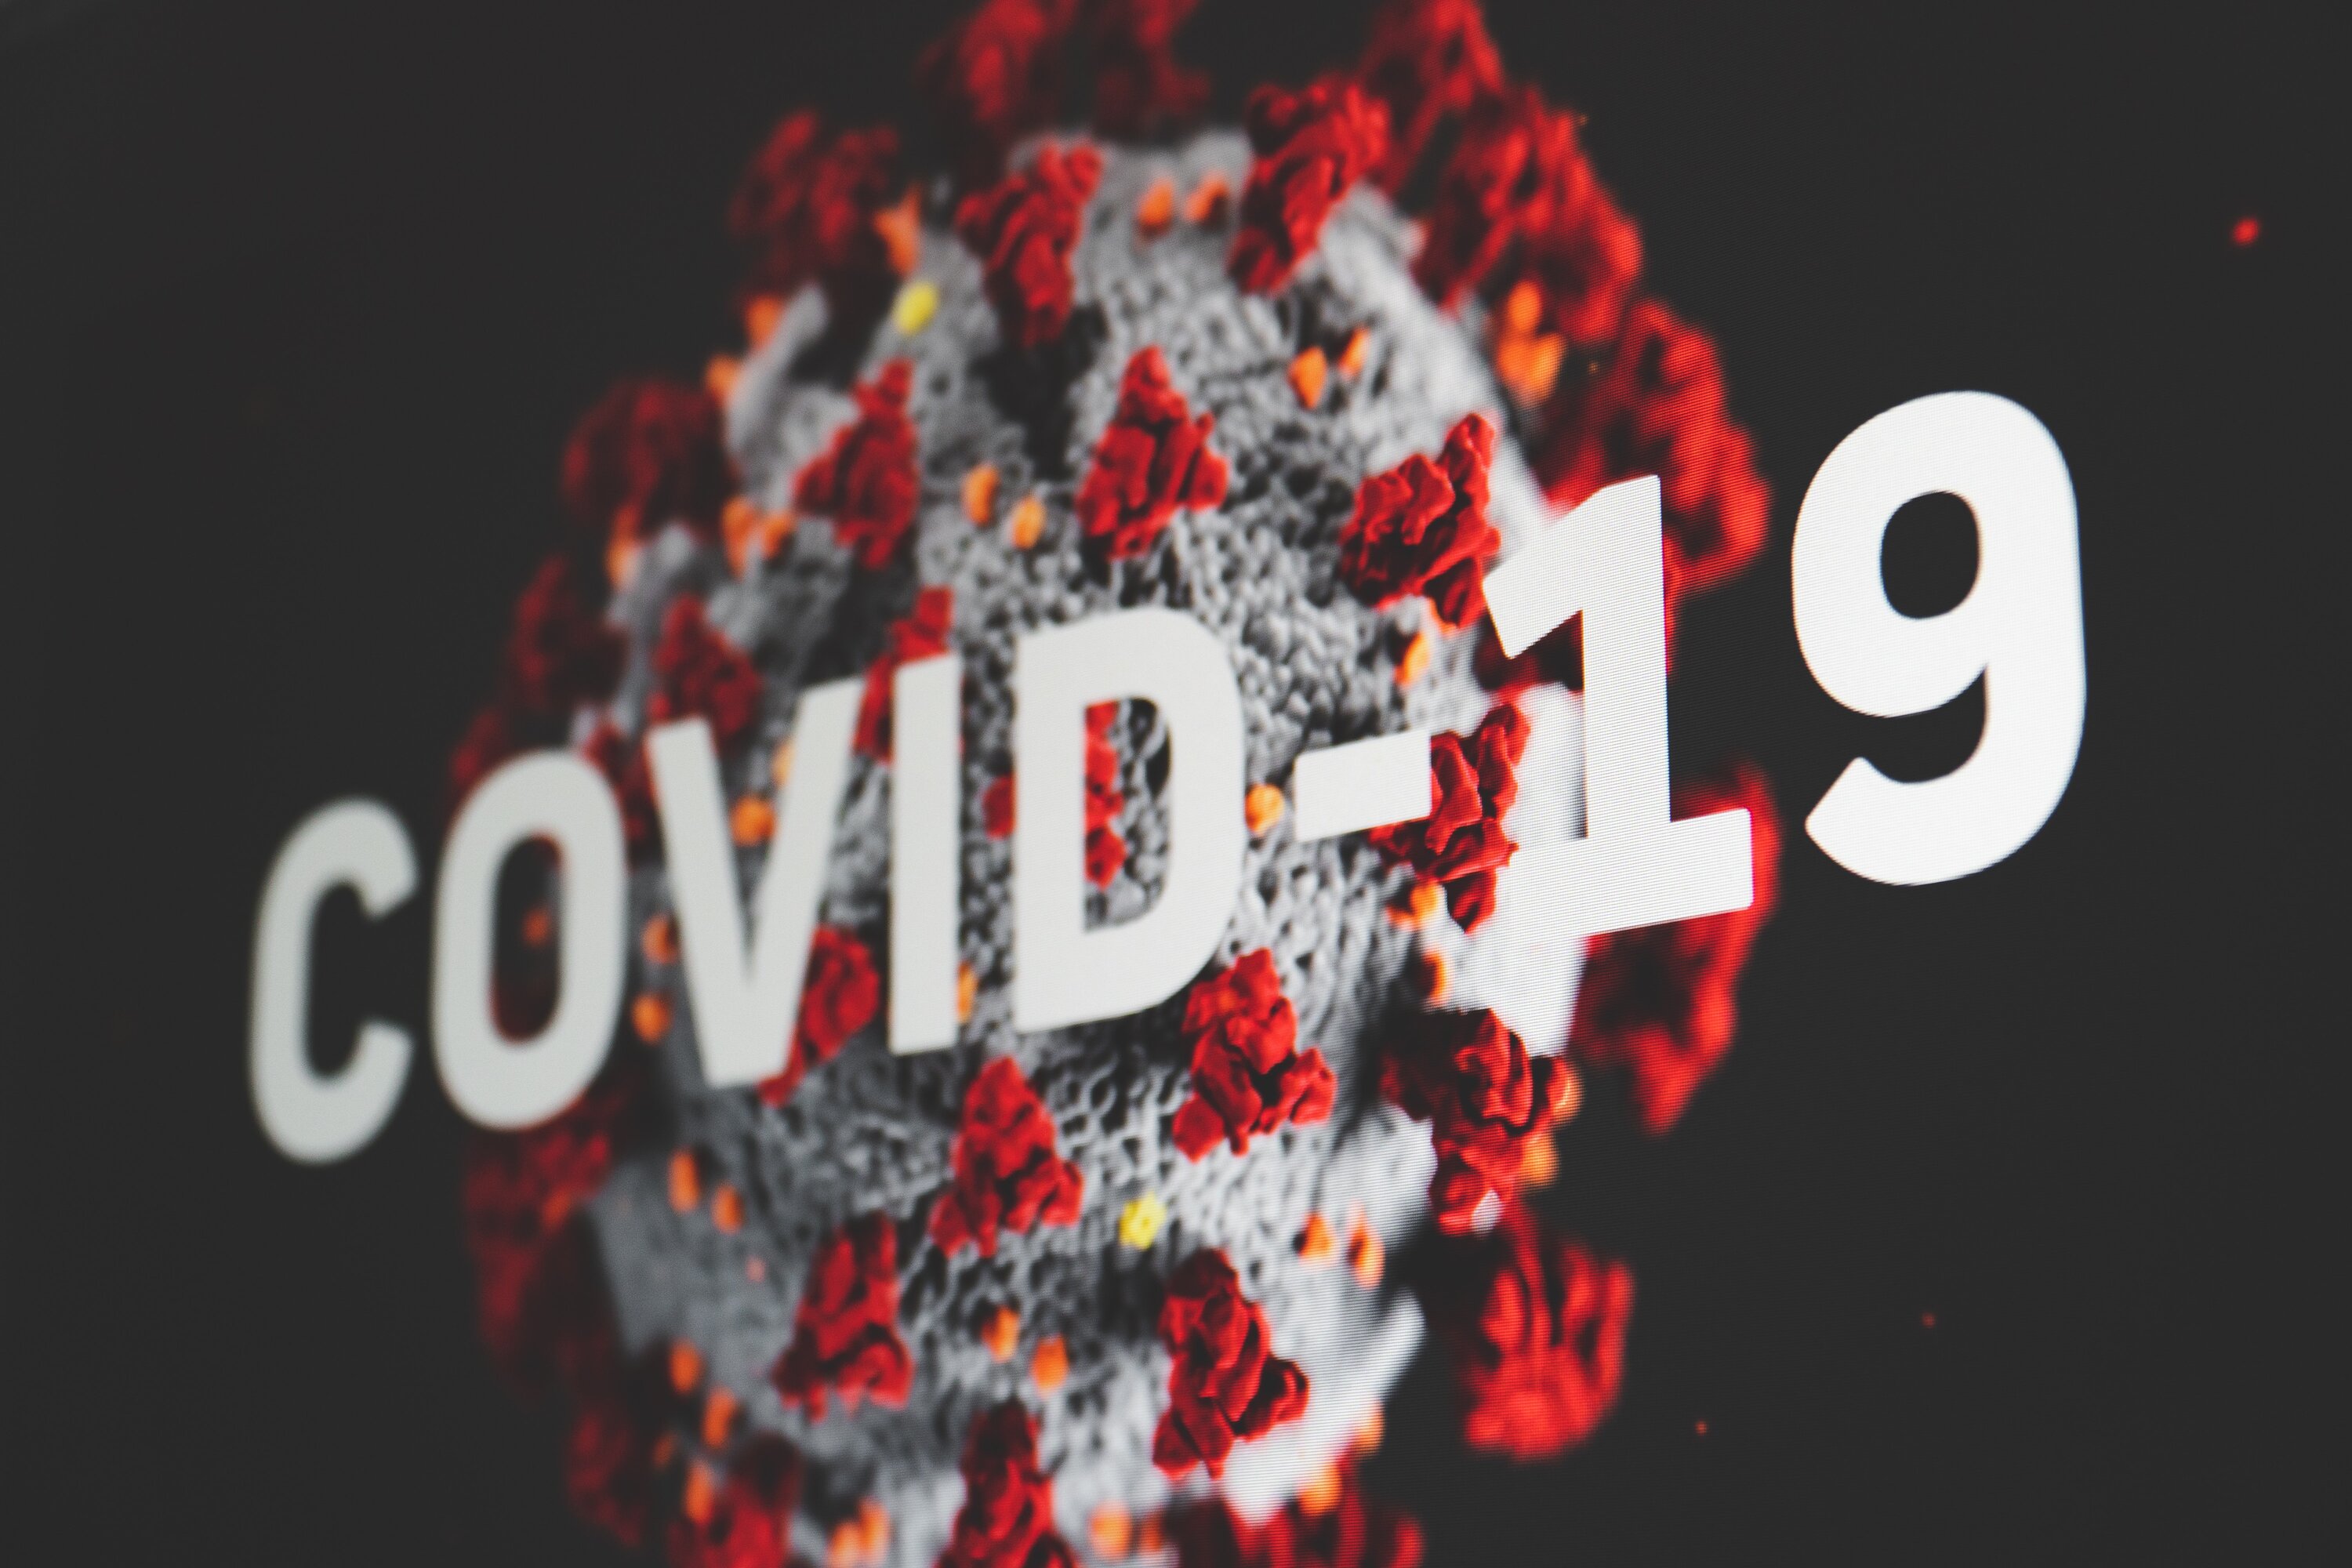 Global Supply Chain resiliency in the wake of the COVID-19 pandemic